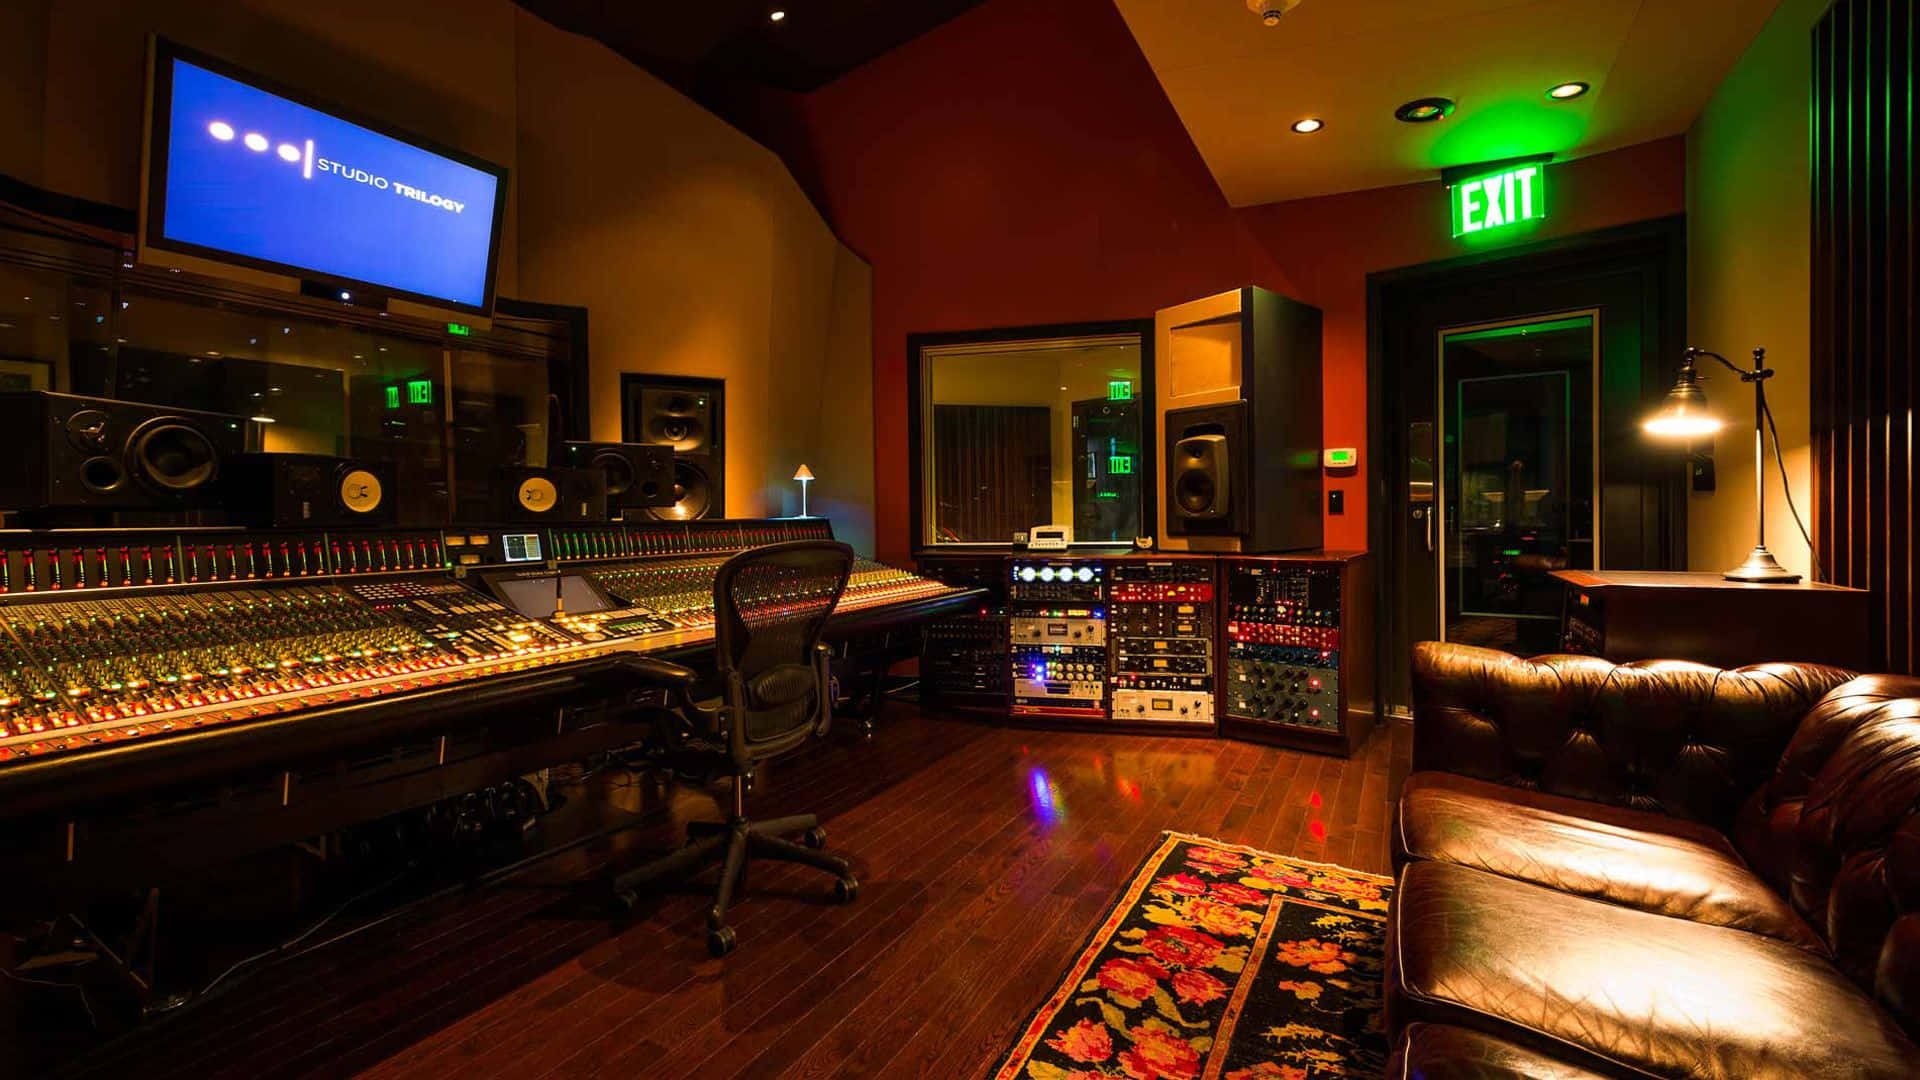 A Recording Studio With A Large Monitor And A Leather Couch